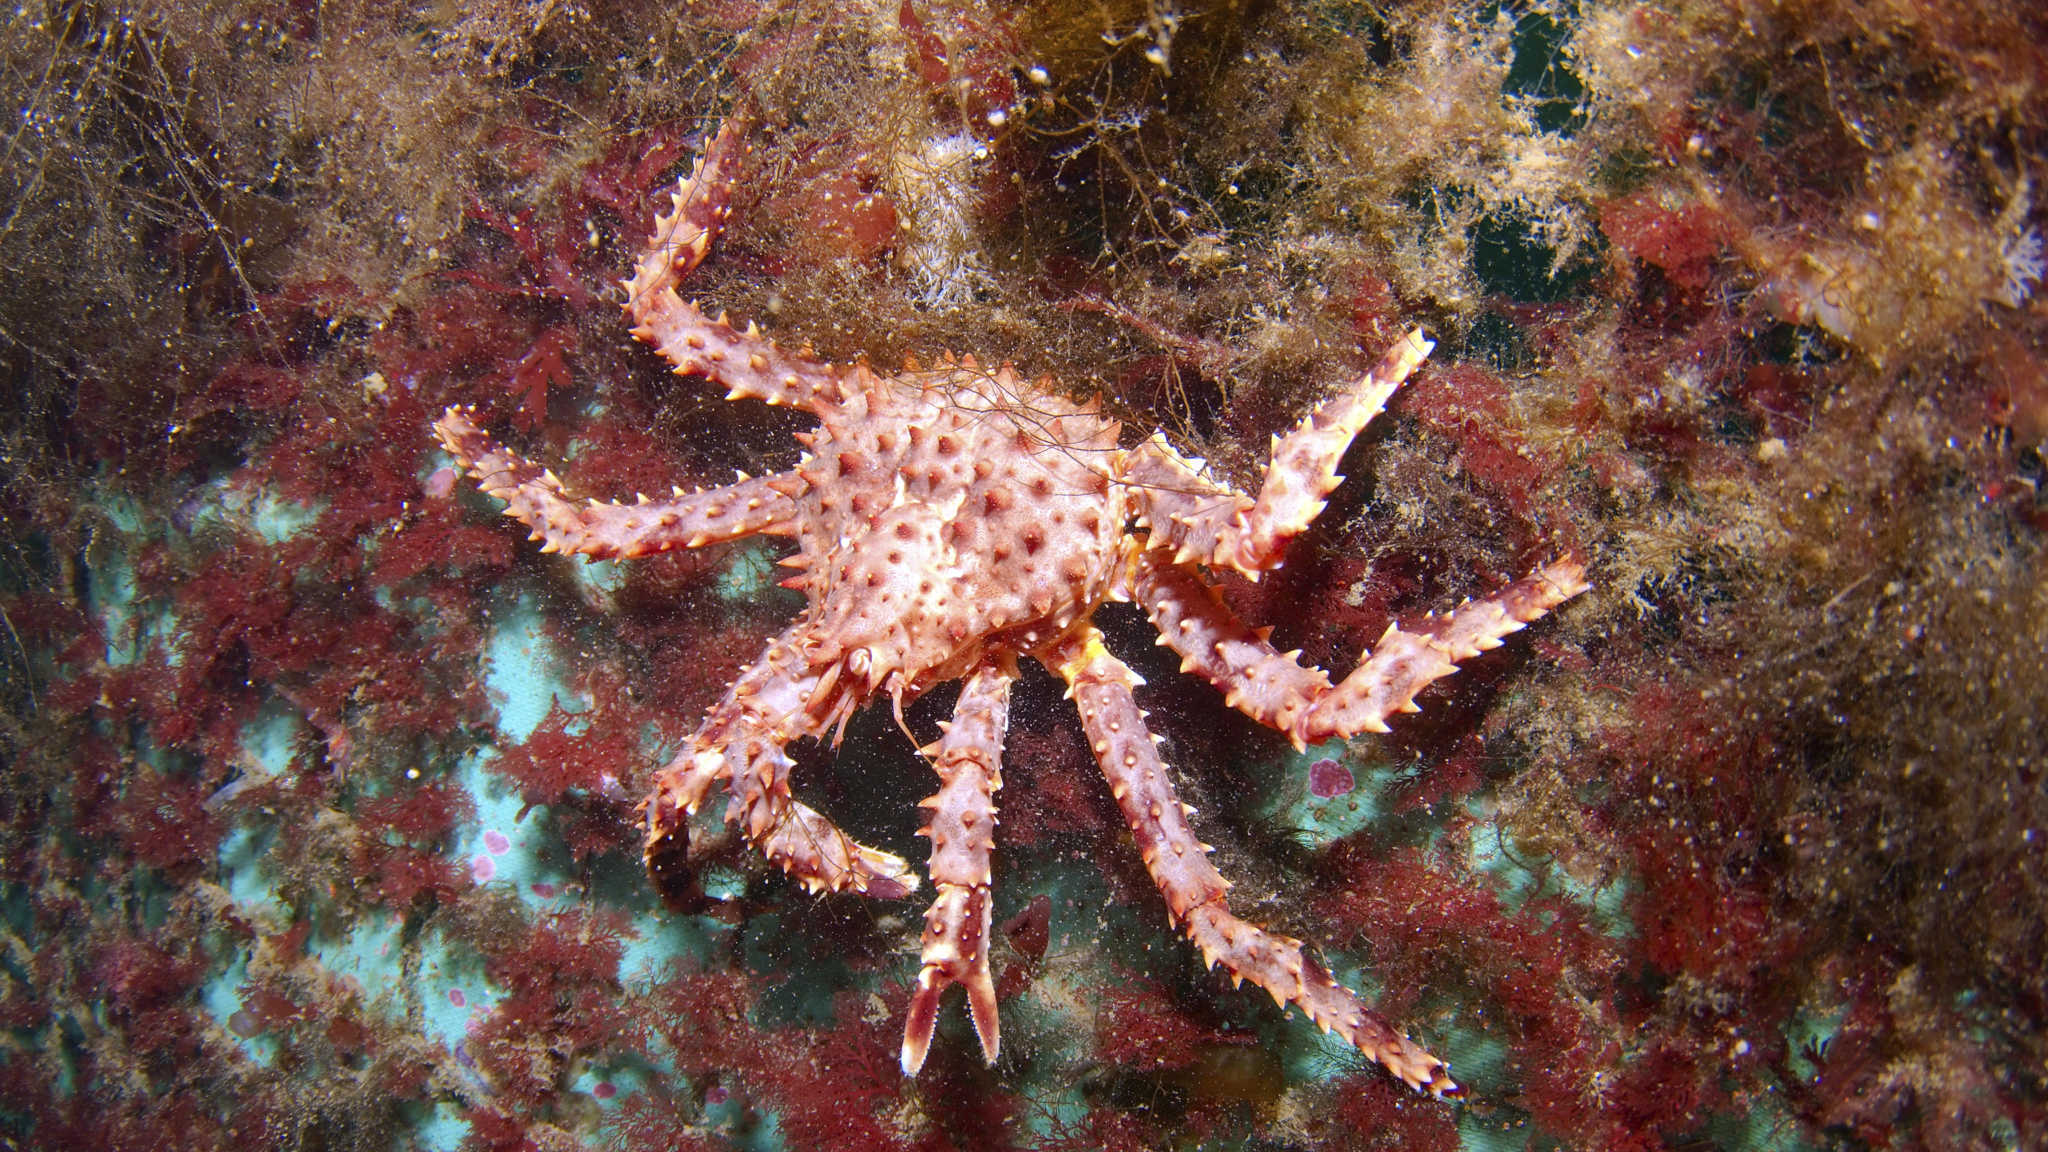 These fascinating crabs aren’t really red